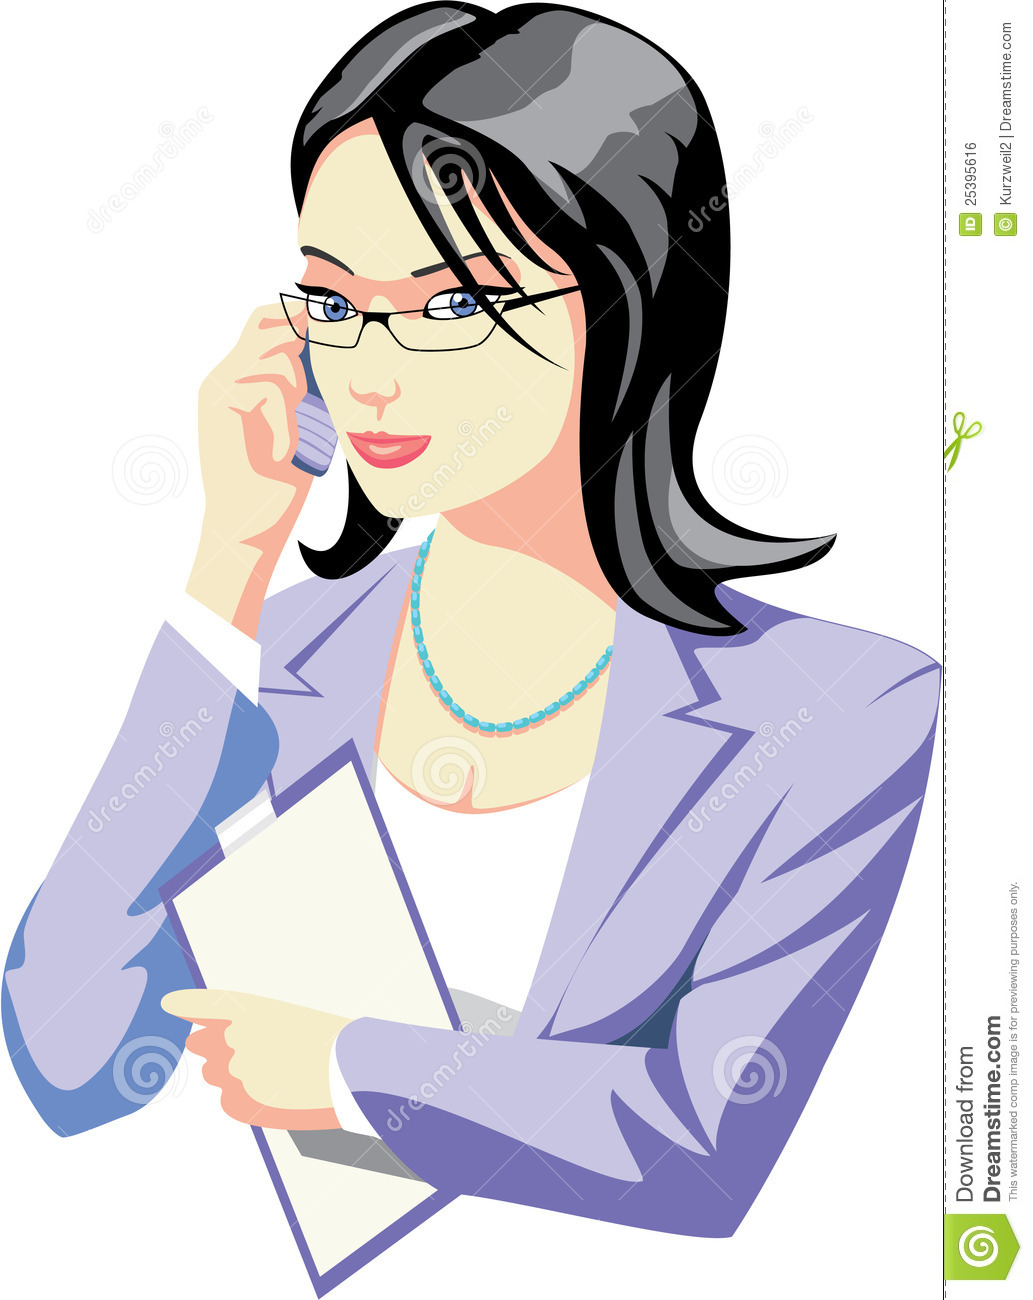 Office Manager Royalty Free Stock Image   Image  25395616